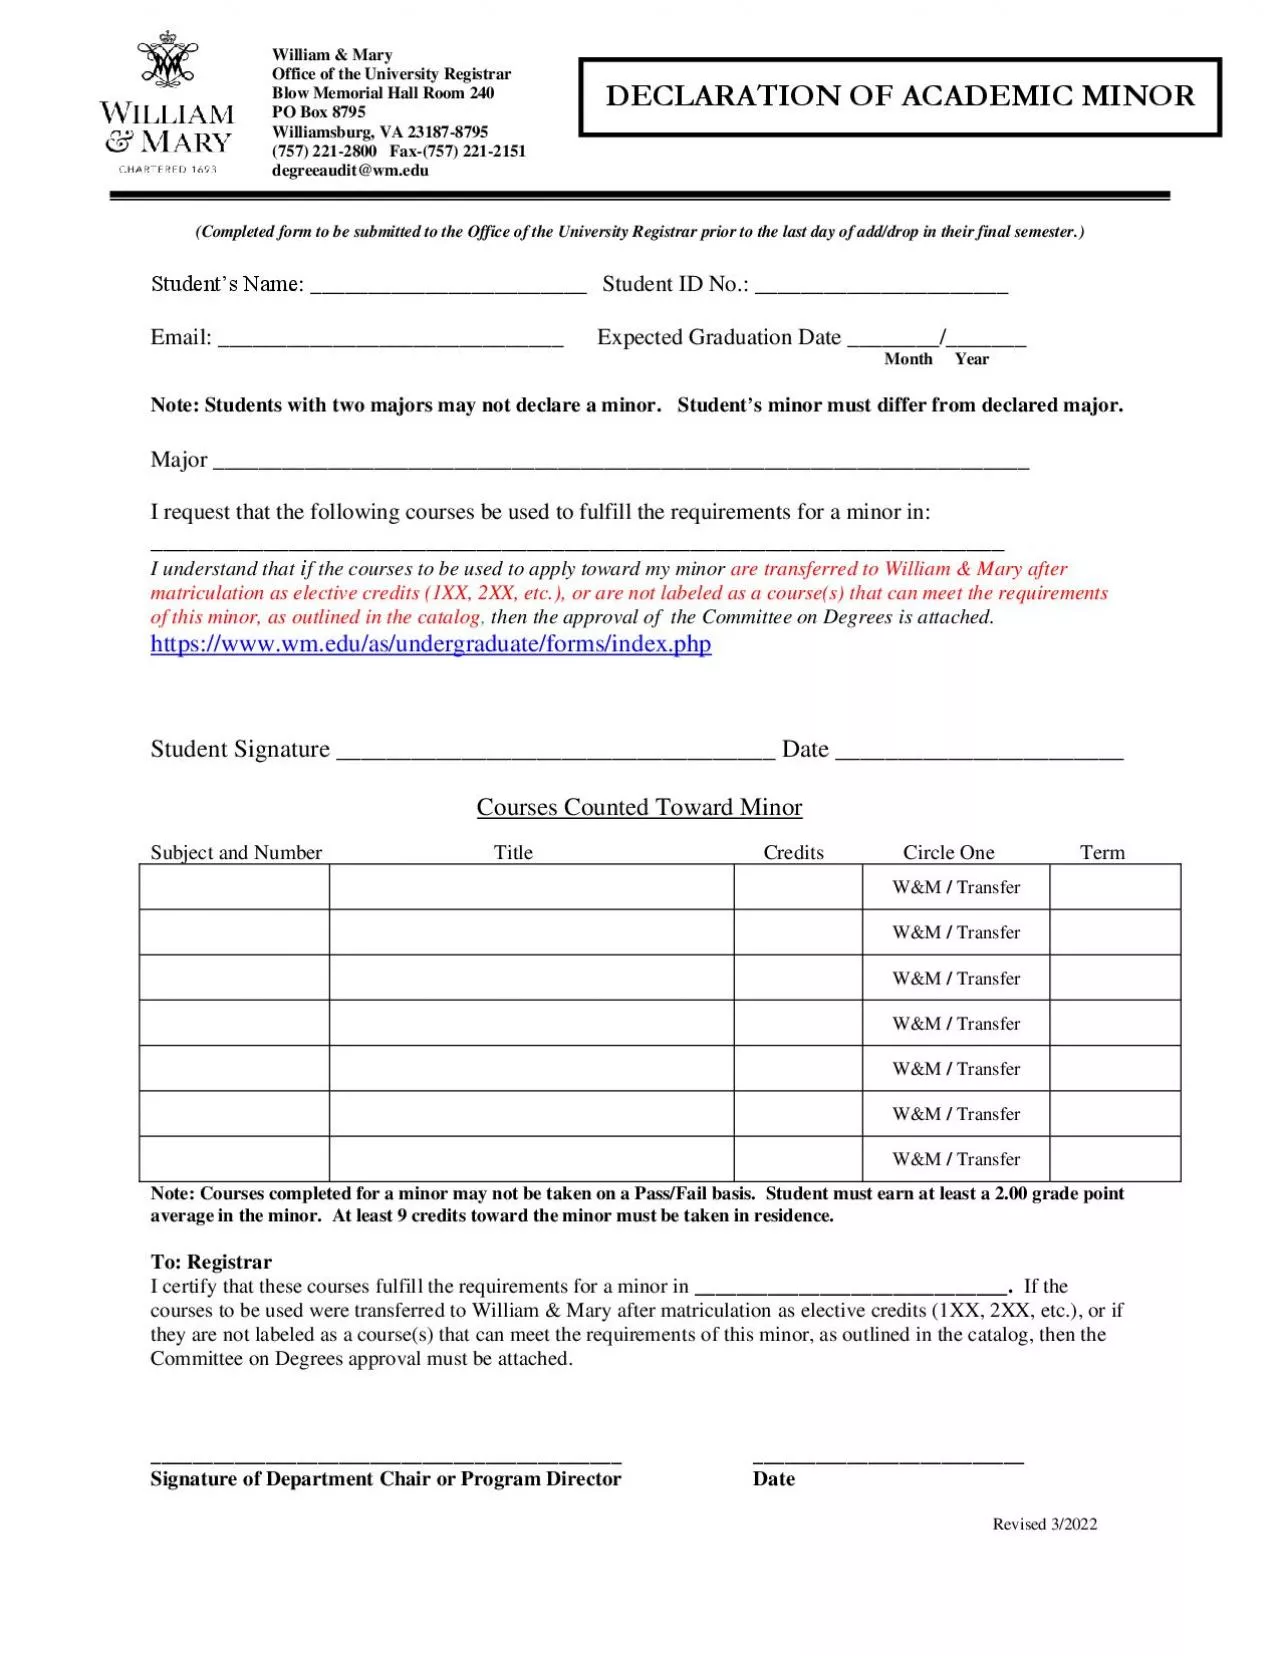 Completed form to be submitted to the Office of the University Registr